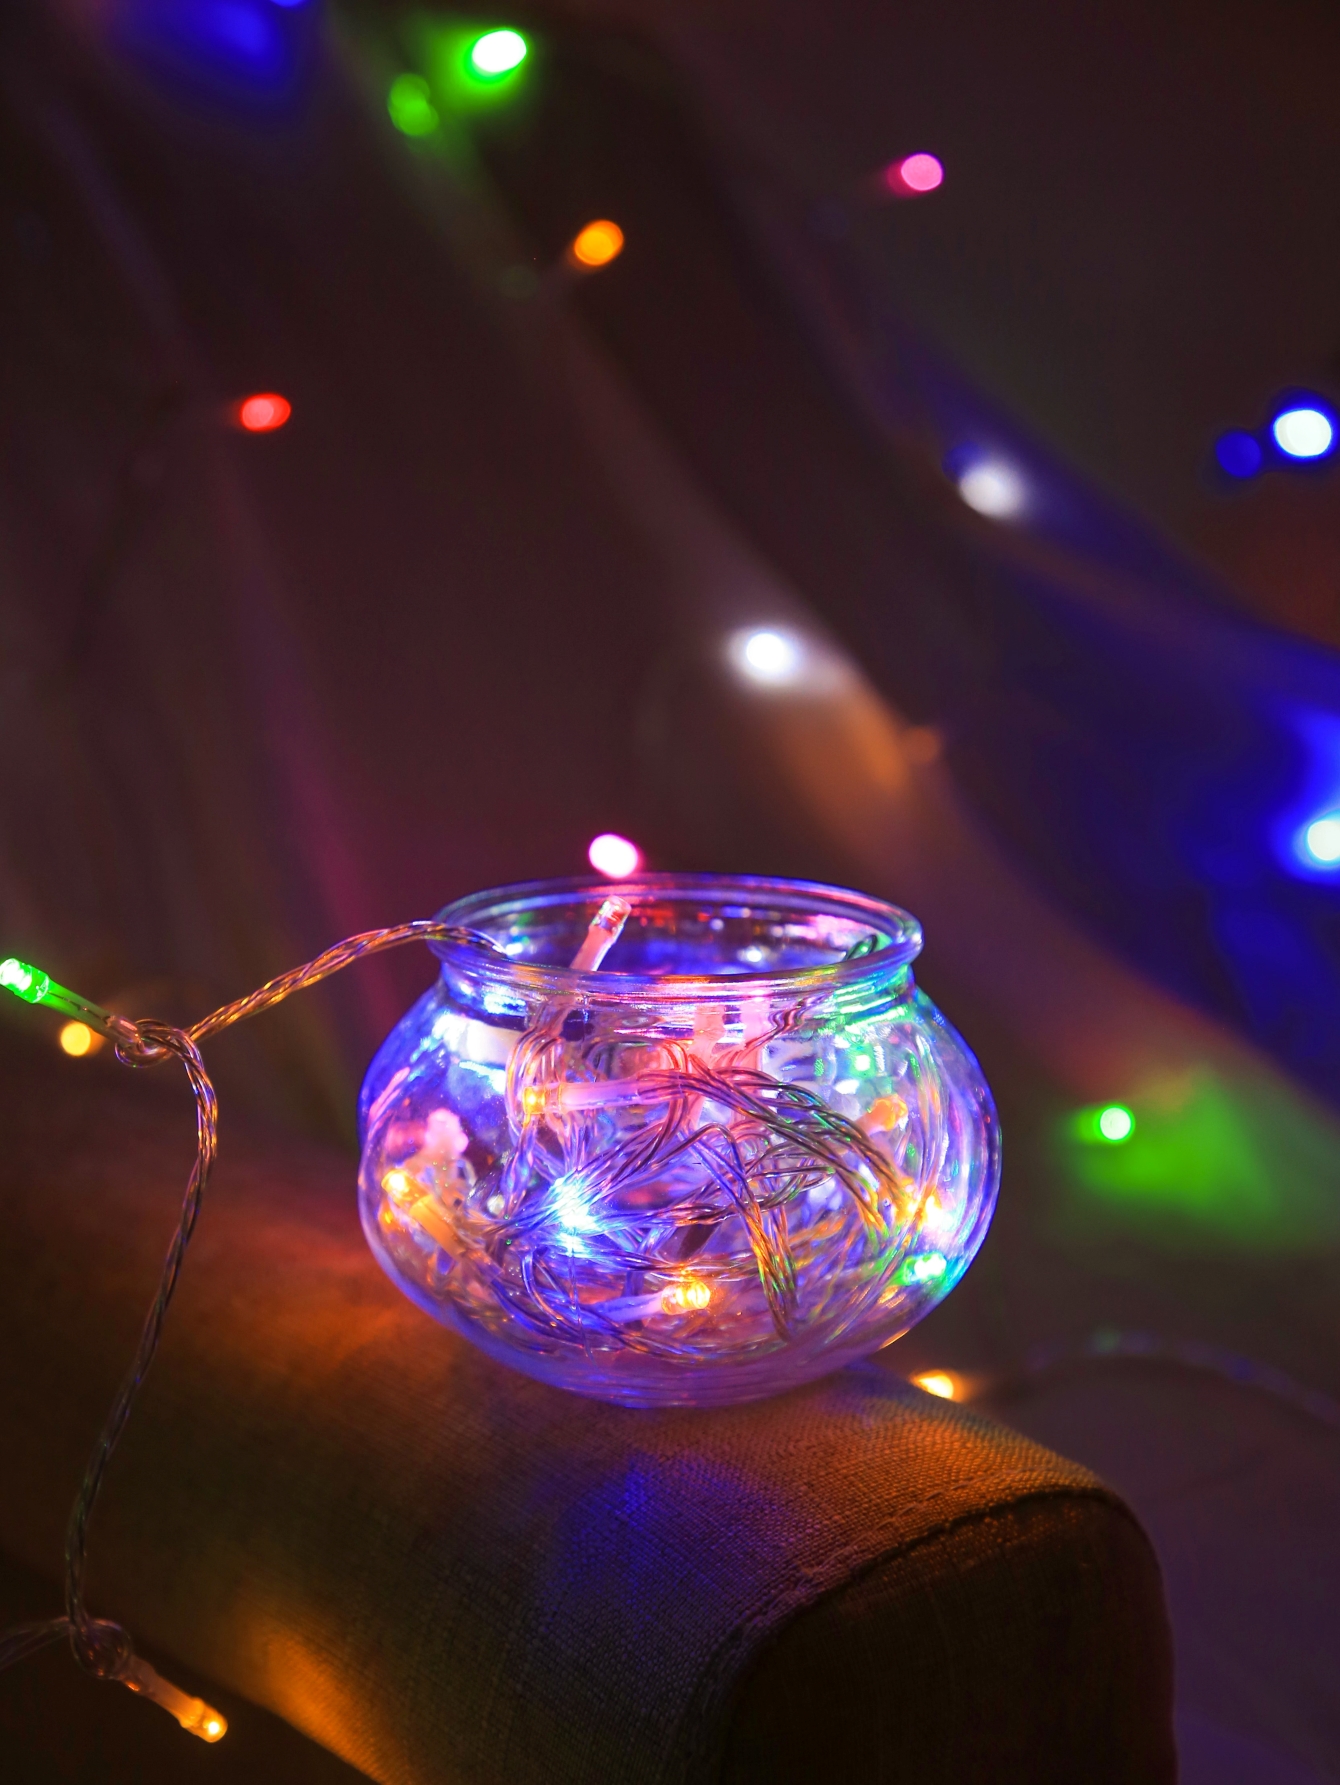 elegant led string lights for christmas parties 6 56ft 9 84ft 12 12ft 32 8ft perfect for decorating and enhancing the festive spirit details 8